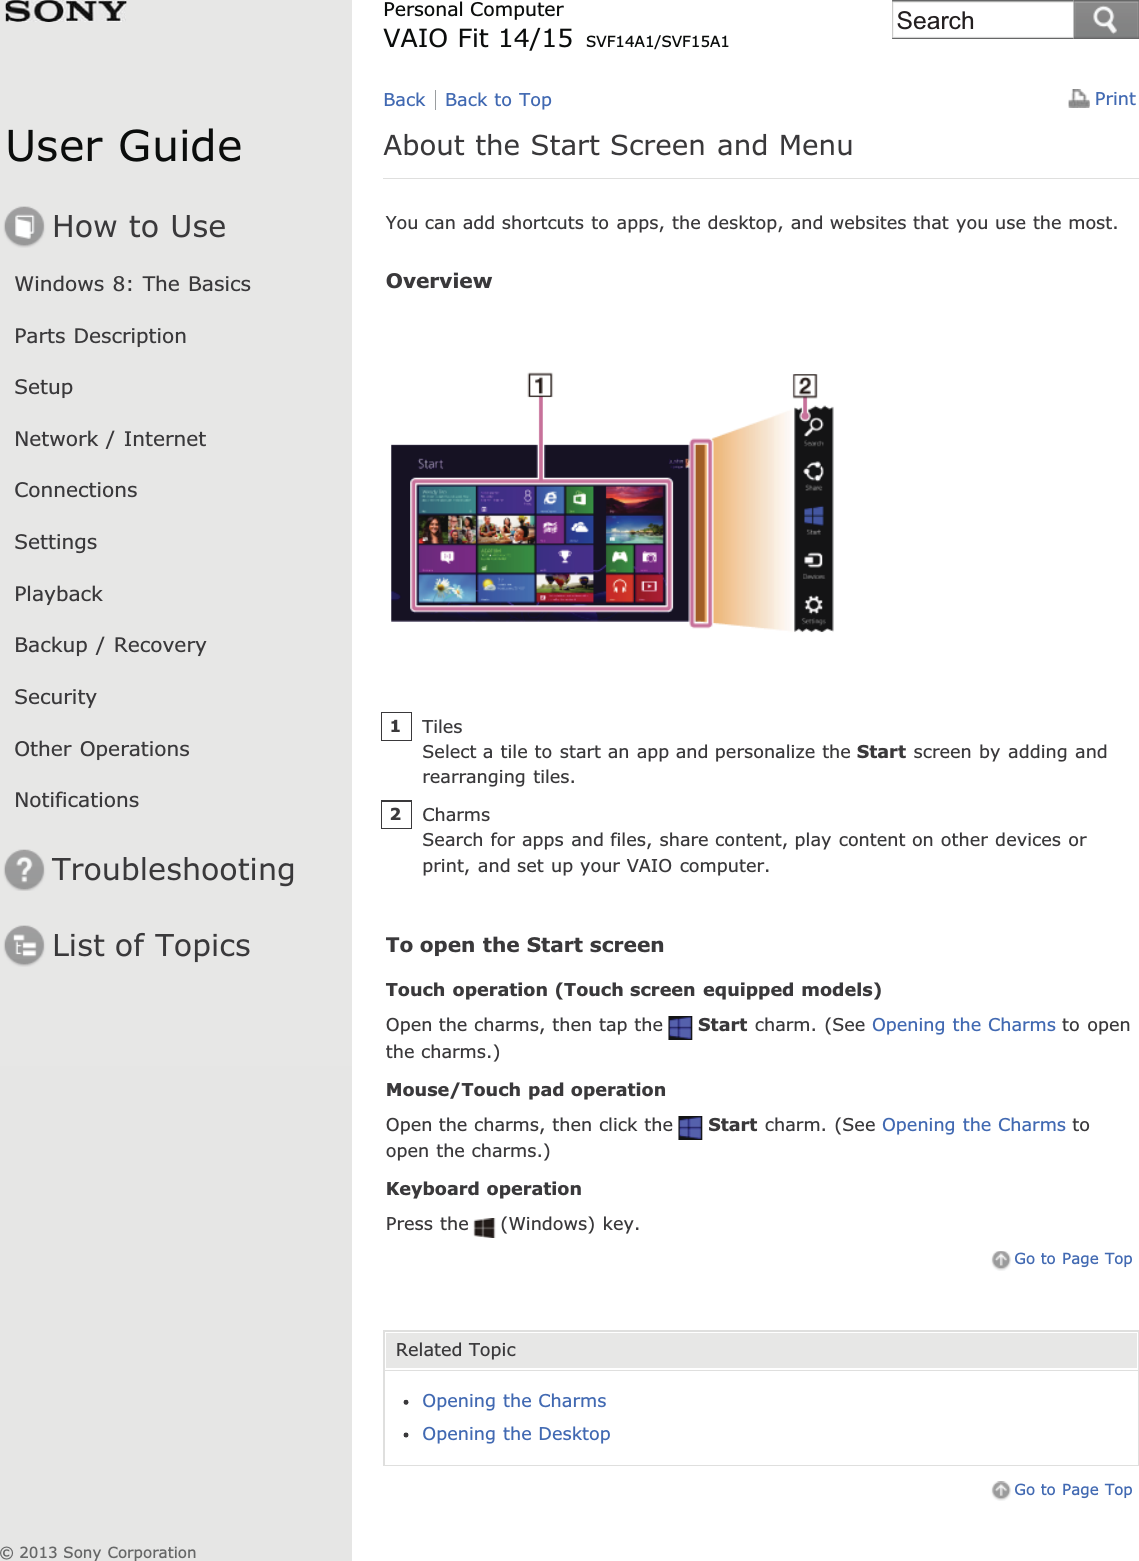 User GuideHow to UseWindows 8: The BasicsParts DescriptionSetupNetwork / InternetConnectionsSettingsPlaybackBackup / RecoverySecurityOther OperationsNotificationsTroubleshootingList of TopicsPrintPersonal ComputerVAIO Fit 14/15 SVF14A1/SVF15A1About the Start Screen and MenuYou can add shortcuts to apps, the desktop, and websites that you use the most.OverviewTo open the Start screenTouch operation (Touch screen equipped models)Open the charms, then tap the Start charm. (See Opening the Charms to openthe charms.)Mouse/Touch pad operationOpen the charms, then click the Start charm. (See Opening the Charms toopen the charms.)Keyboard operationPress the (Windows) key.Go to Page TopRelated TopicOpening the CharmsOpening the DesktopGo to Page TopBack Back to TopTilesSelect a tile to start an app and personalize the Start screen by adding andrearranging tiles.1CharmsSearch for apps and files, share content, play content on other devices orprint, and set up your VAIO computer.2© 2013 Sony CorporationSearch